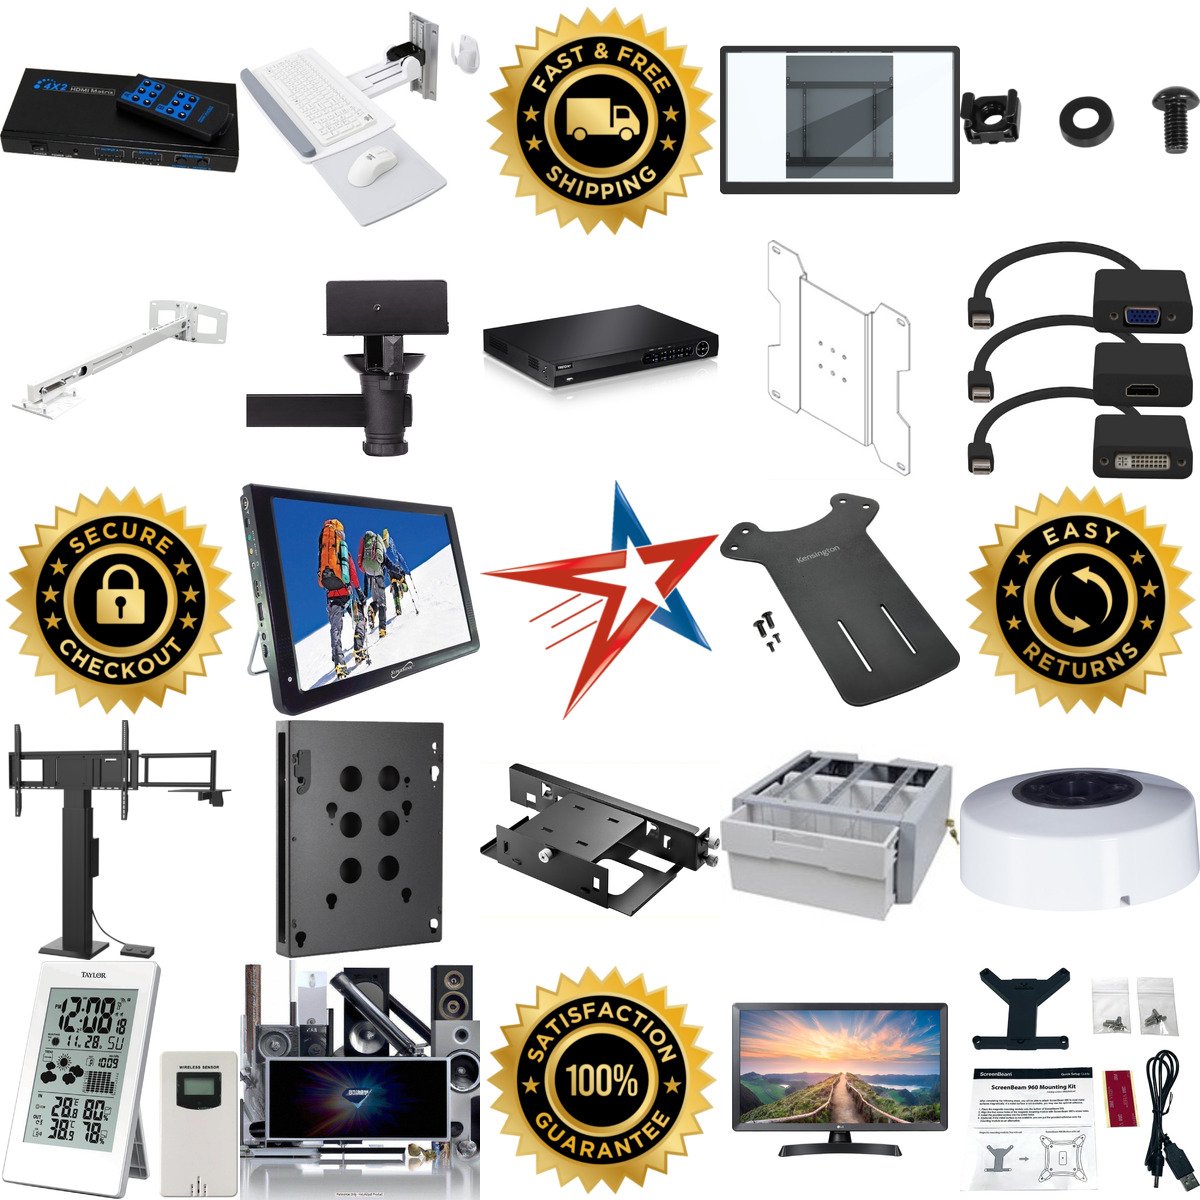 A selection of Tvs and Home Theater products on GoVets